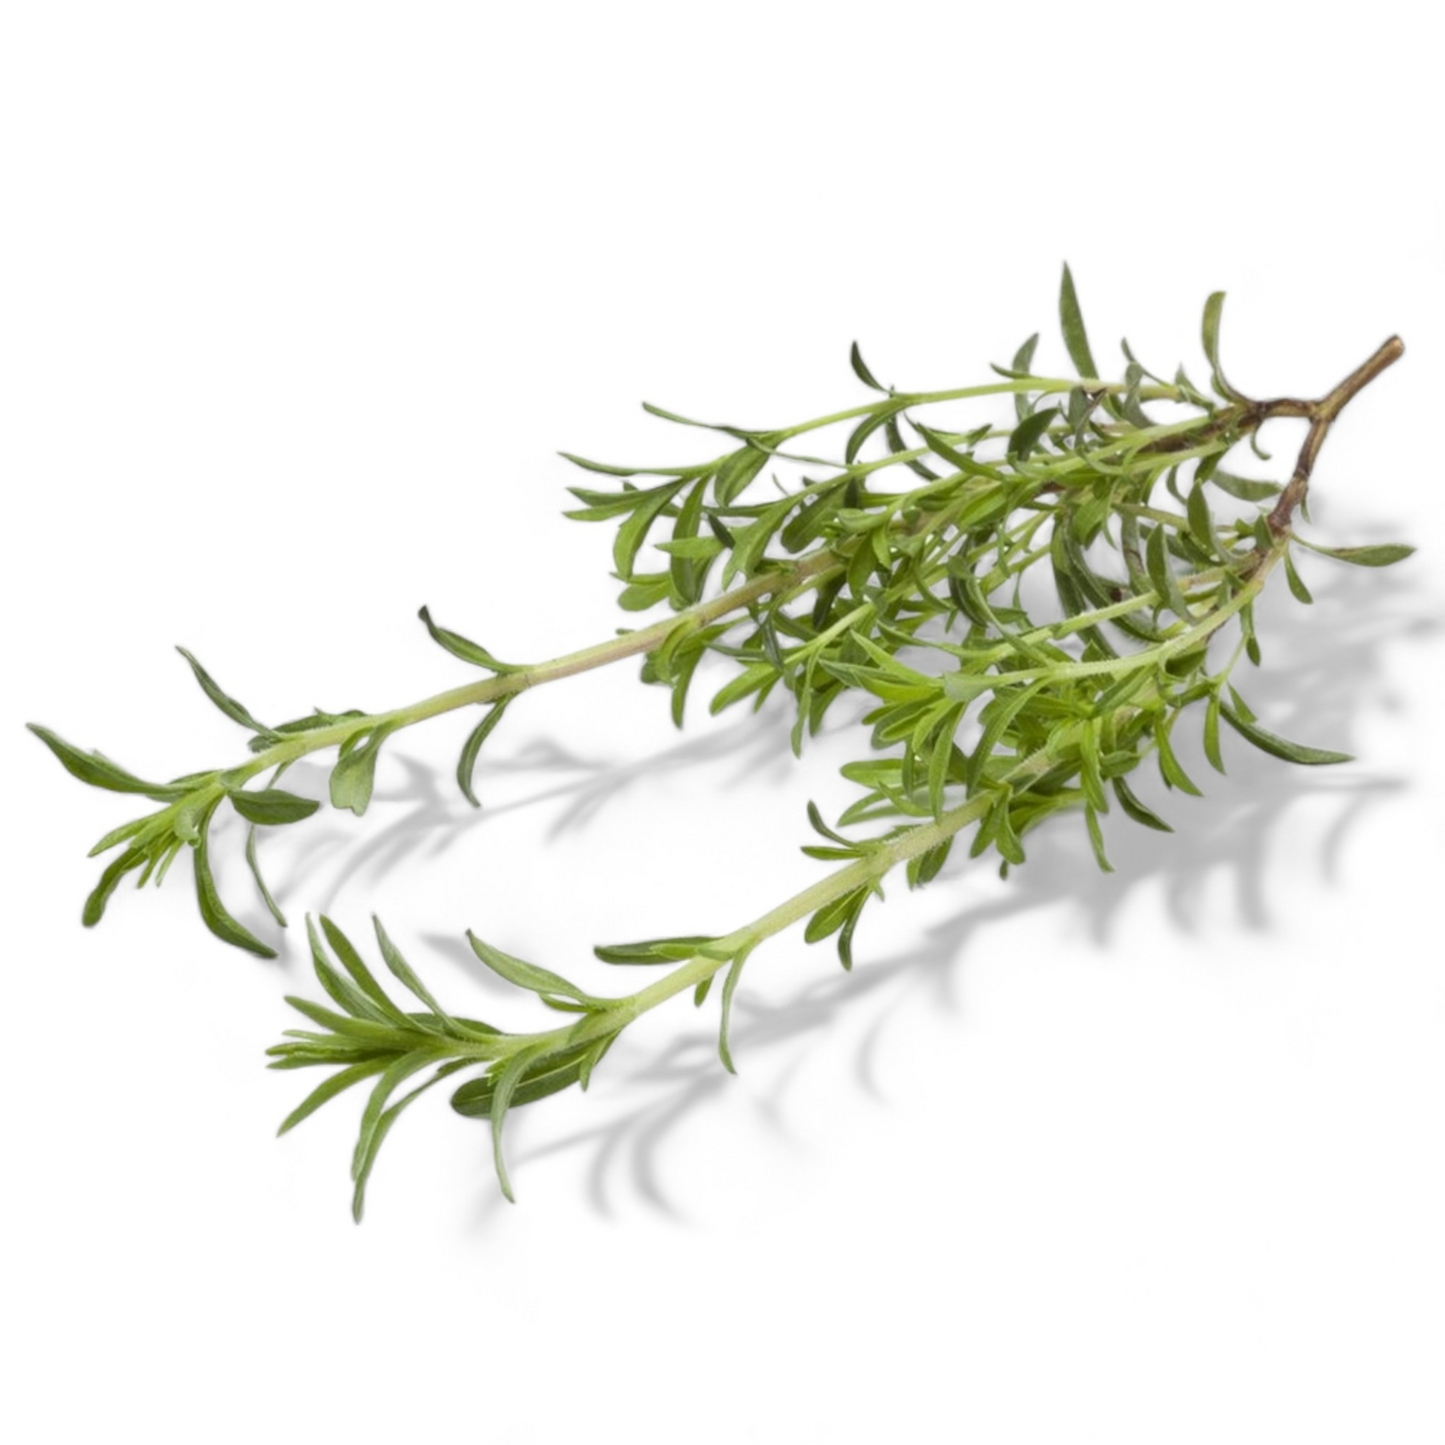 Fresh summer savory herb sprigs isolated on white background